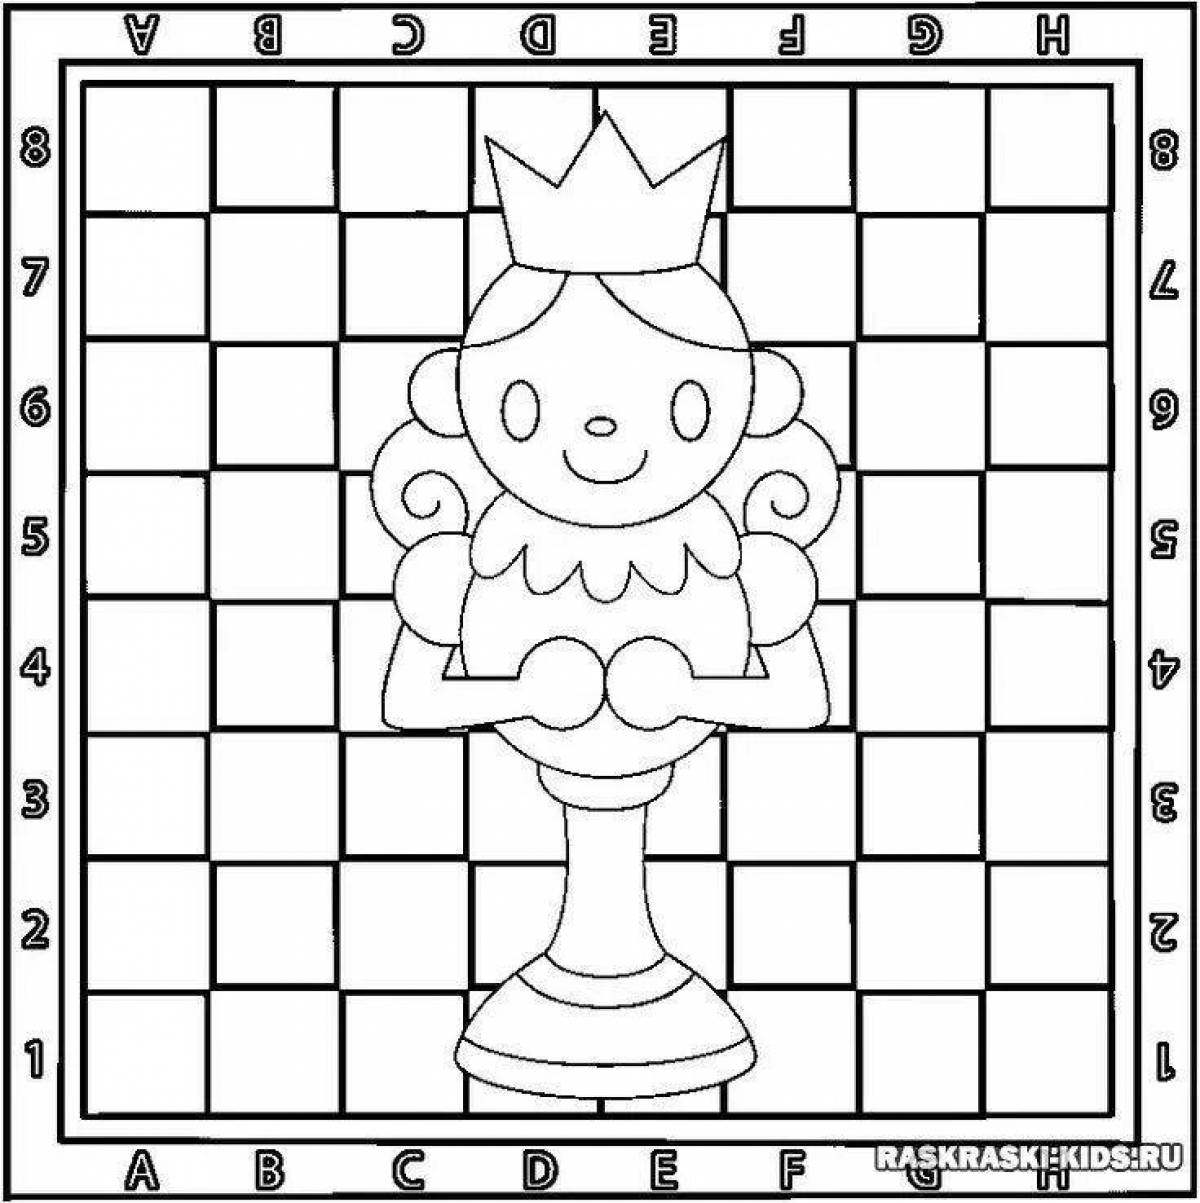 Gorgeous chess pieces coloring book